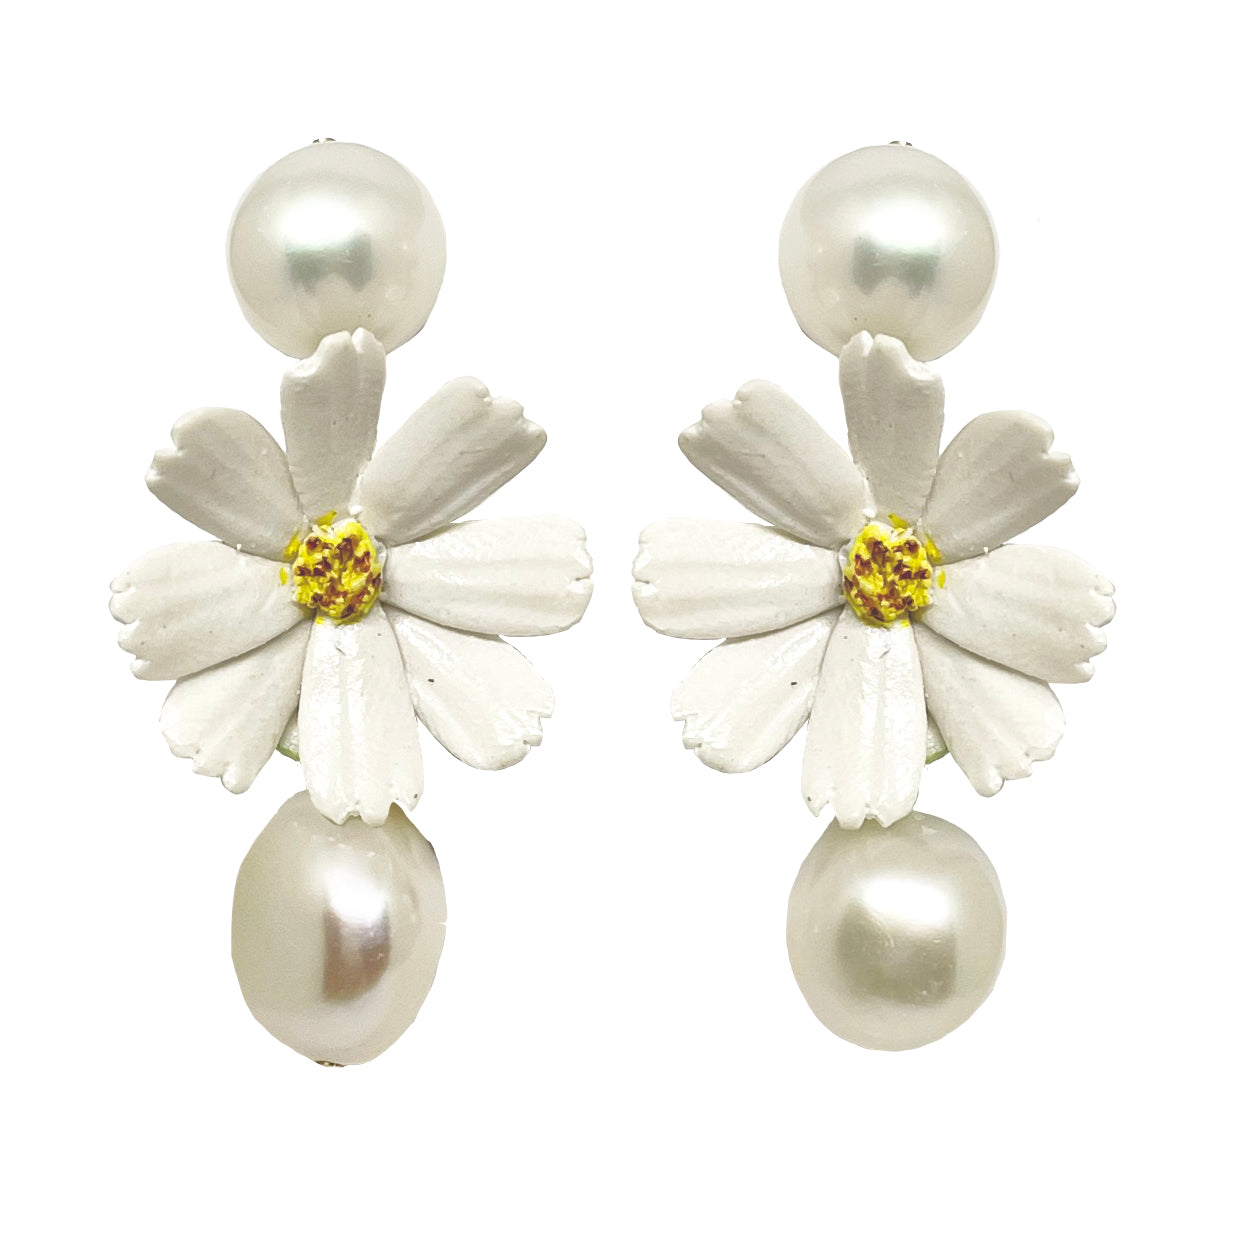 Cosmos pearl drops in white – Meg Carter Designs